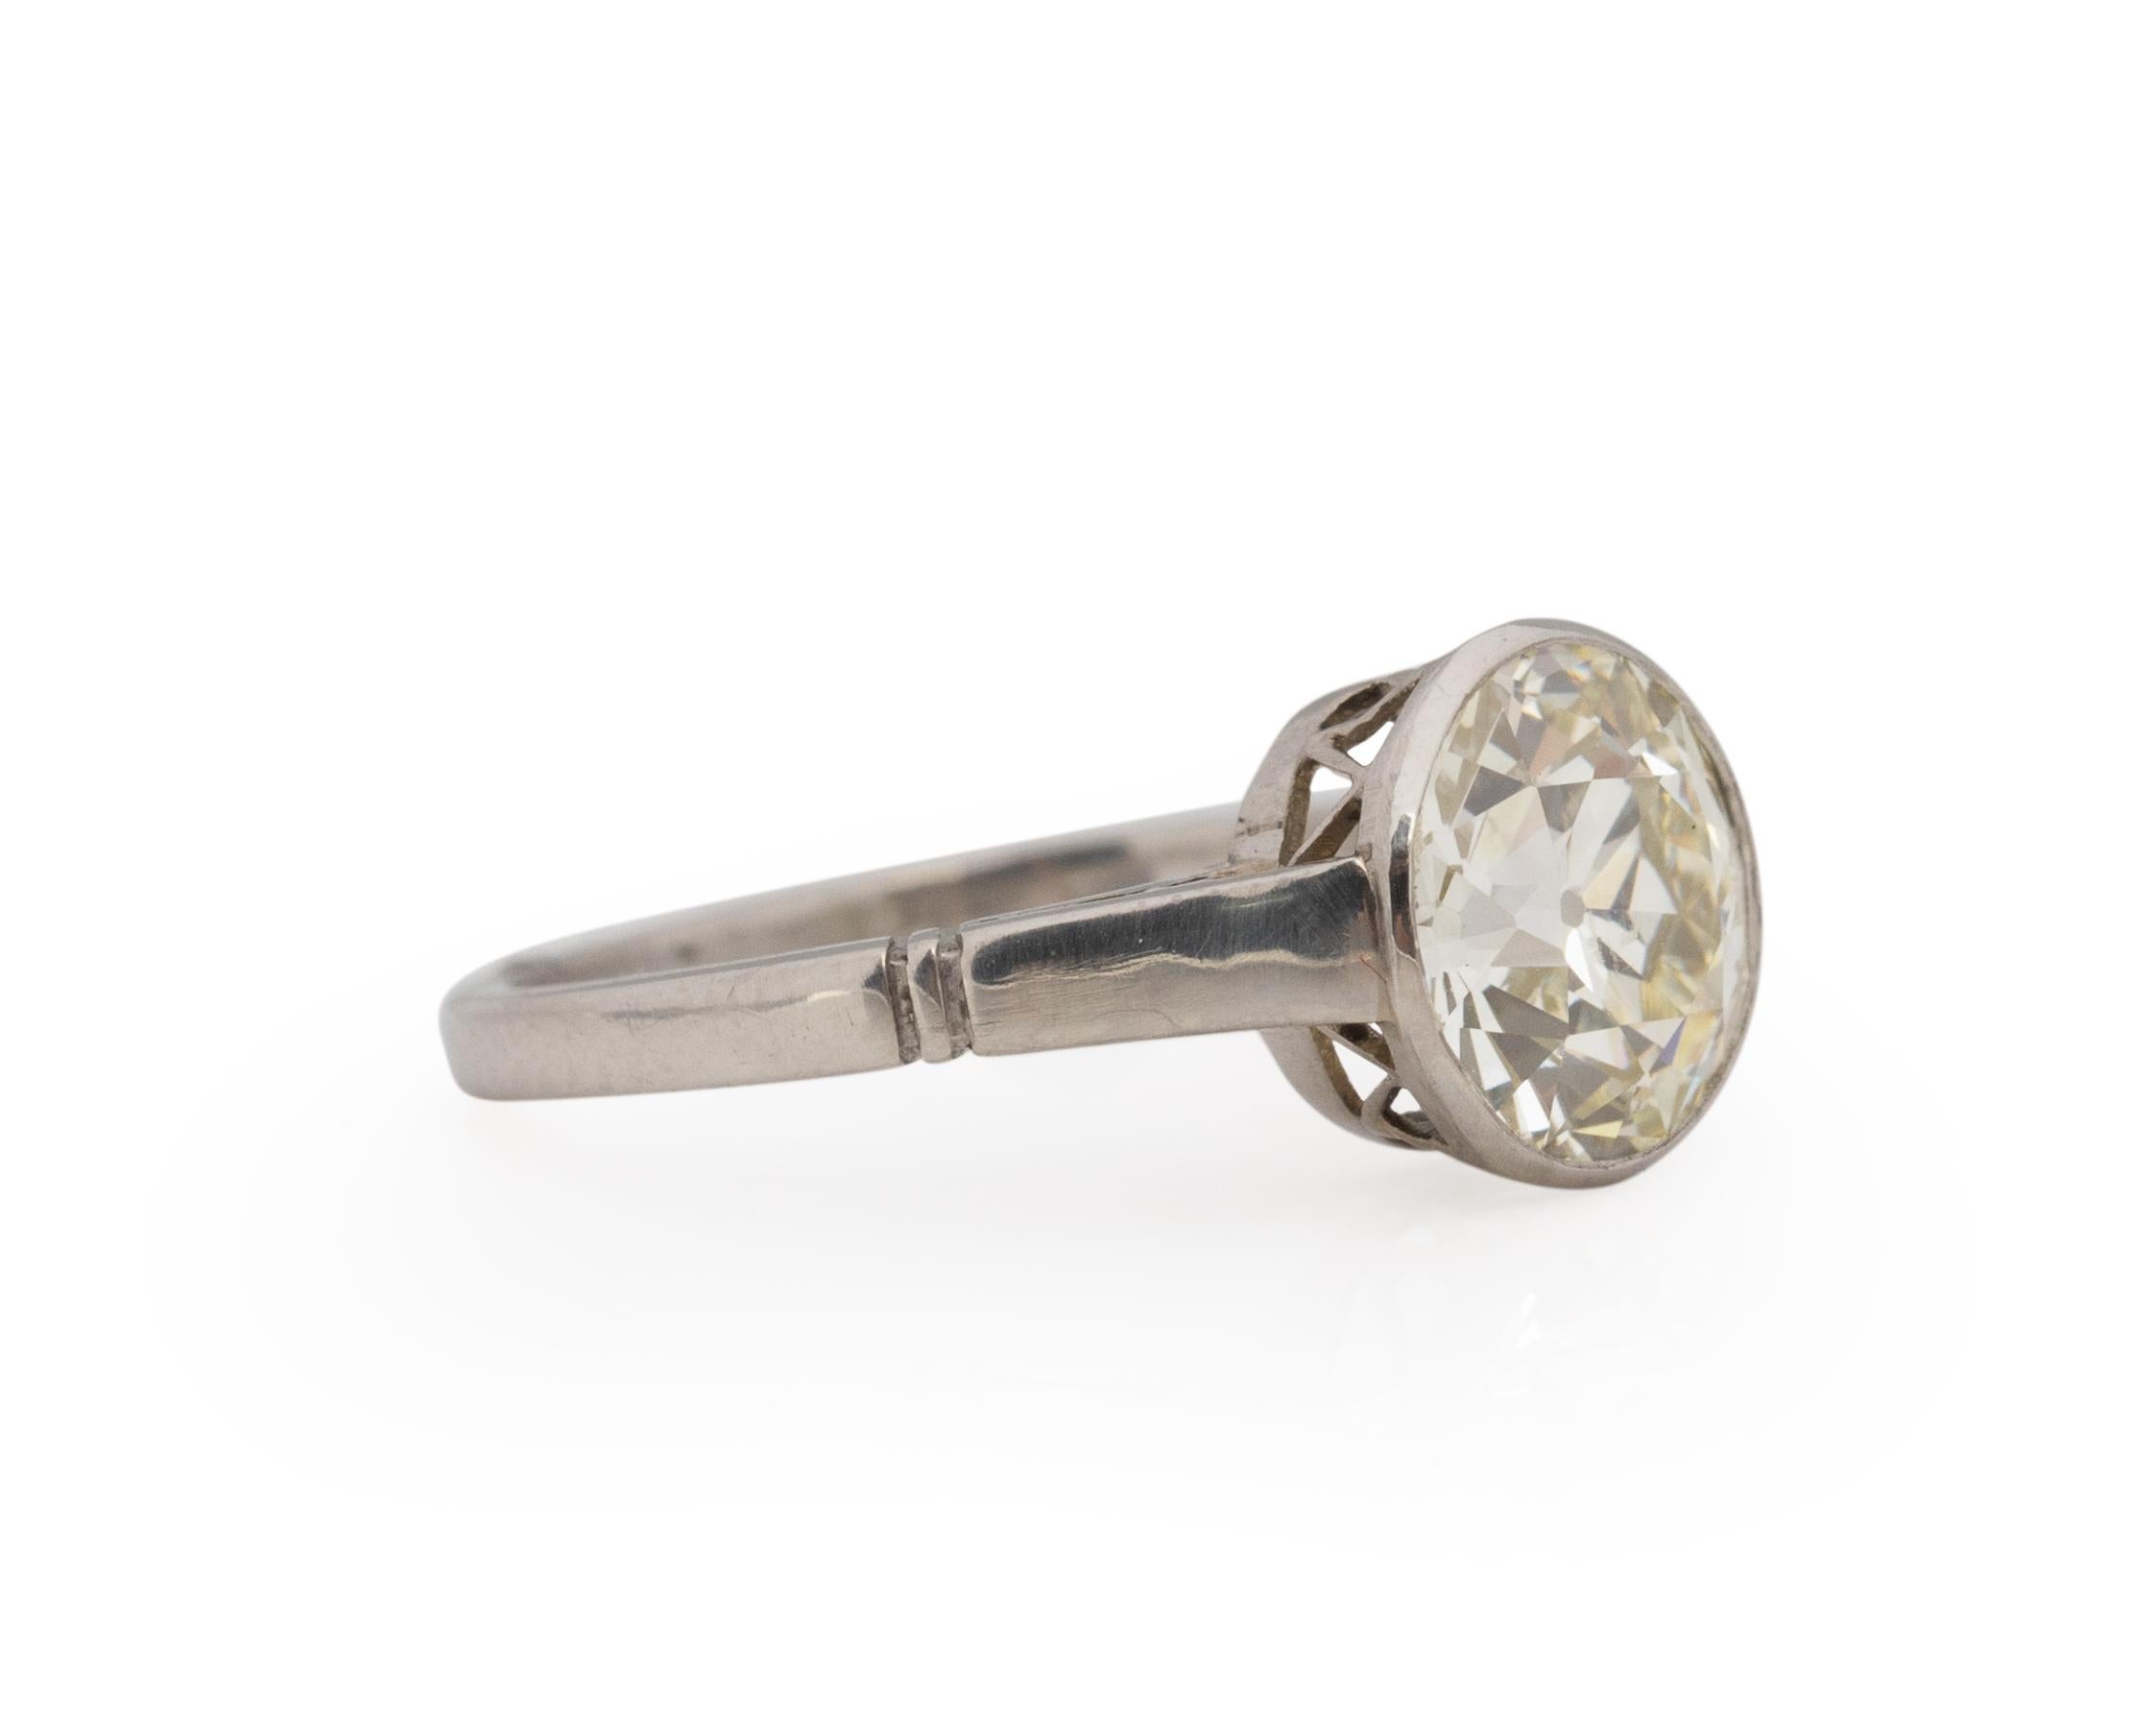 Ring Size: 5.5
Metal Type: Platinum [Hallmarked, and Tested]
Weight: 3.9 grams
Hallmarks: French hallmark on inner shank

Center Diamond Details:
GIA REPORT #: 5221022929
Weight: 2.11ct
Cut: Old European brilliant
Color: O/P
Clarity: